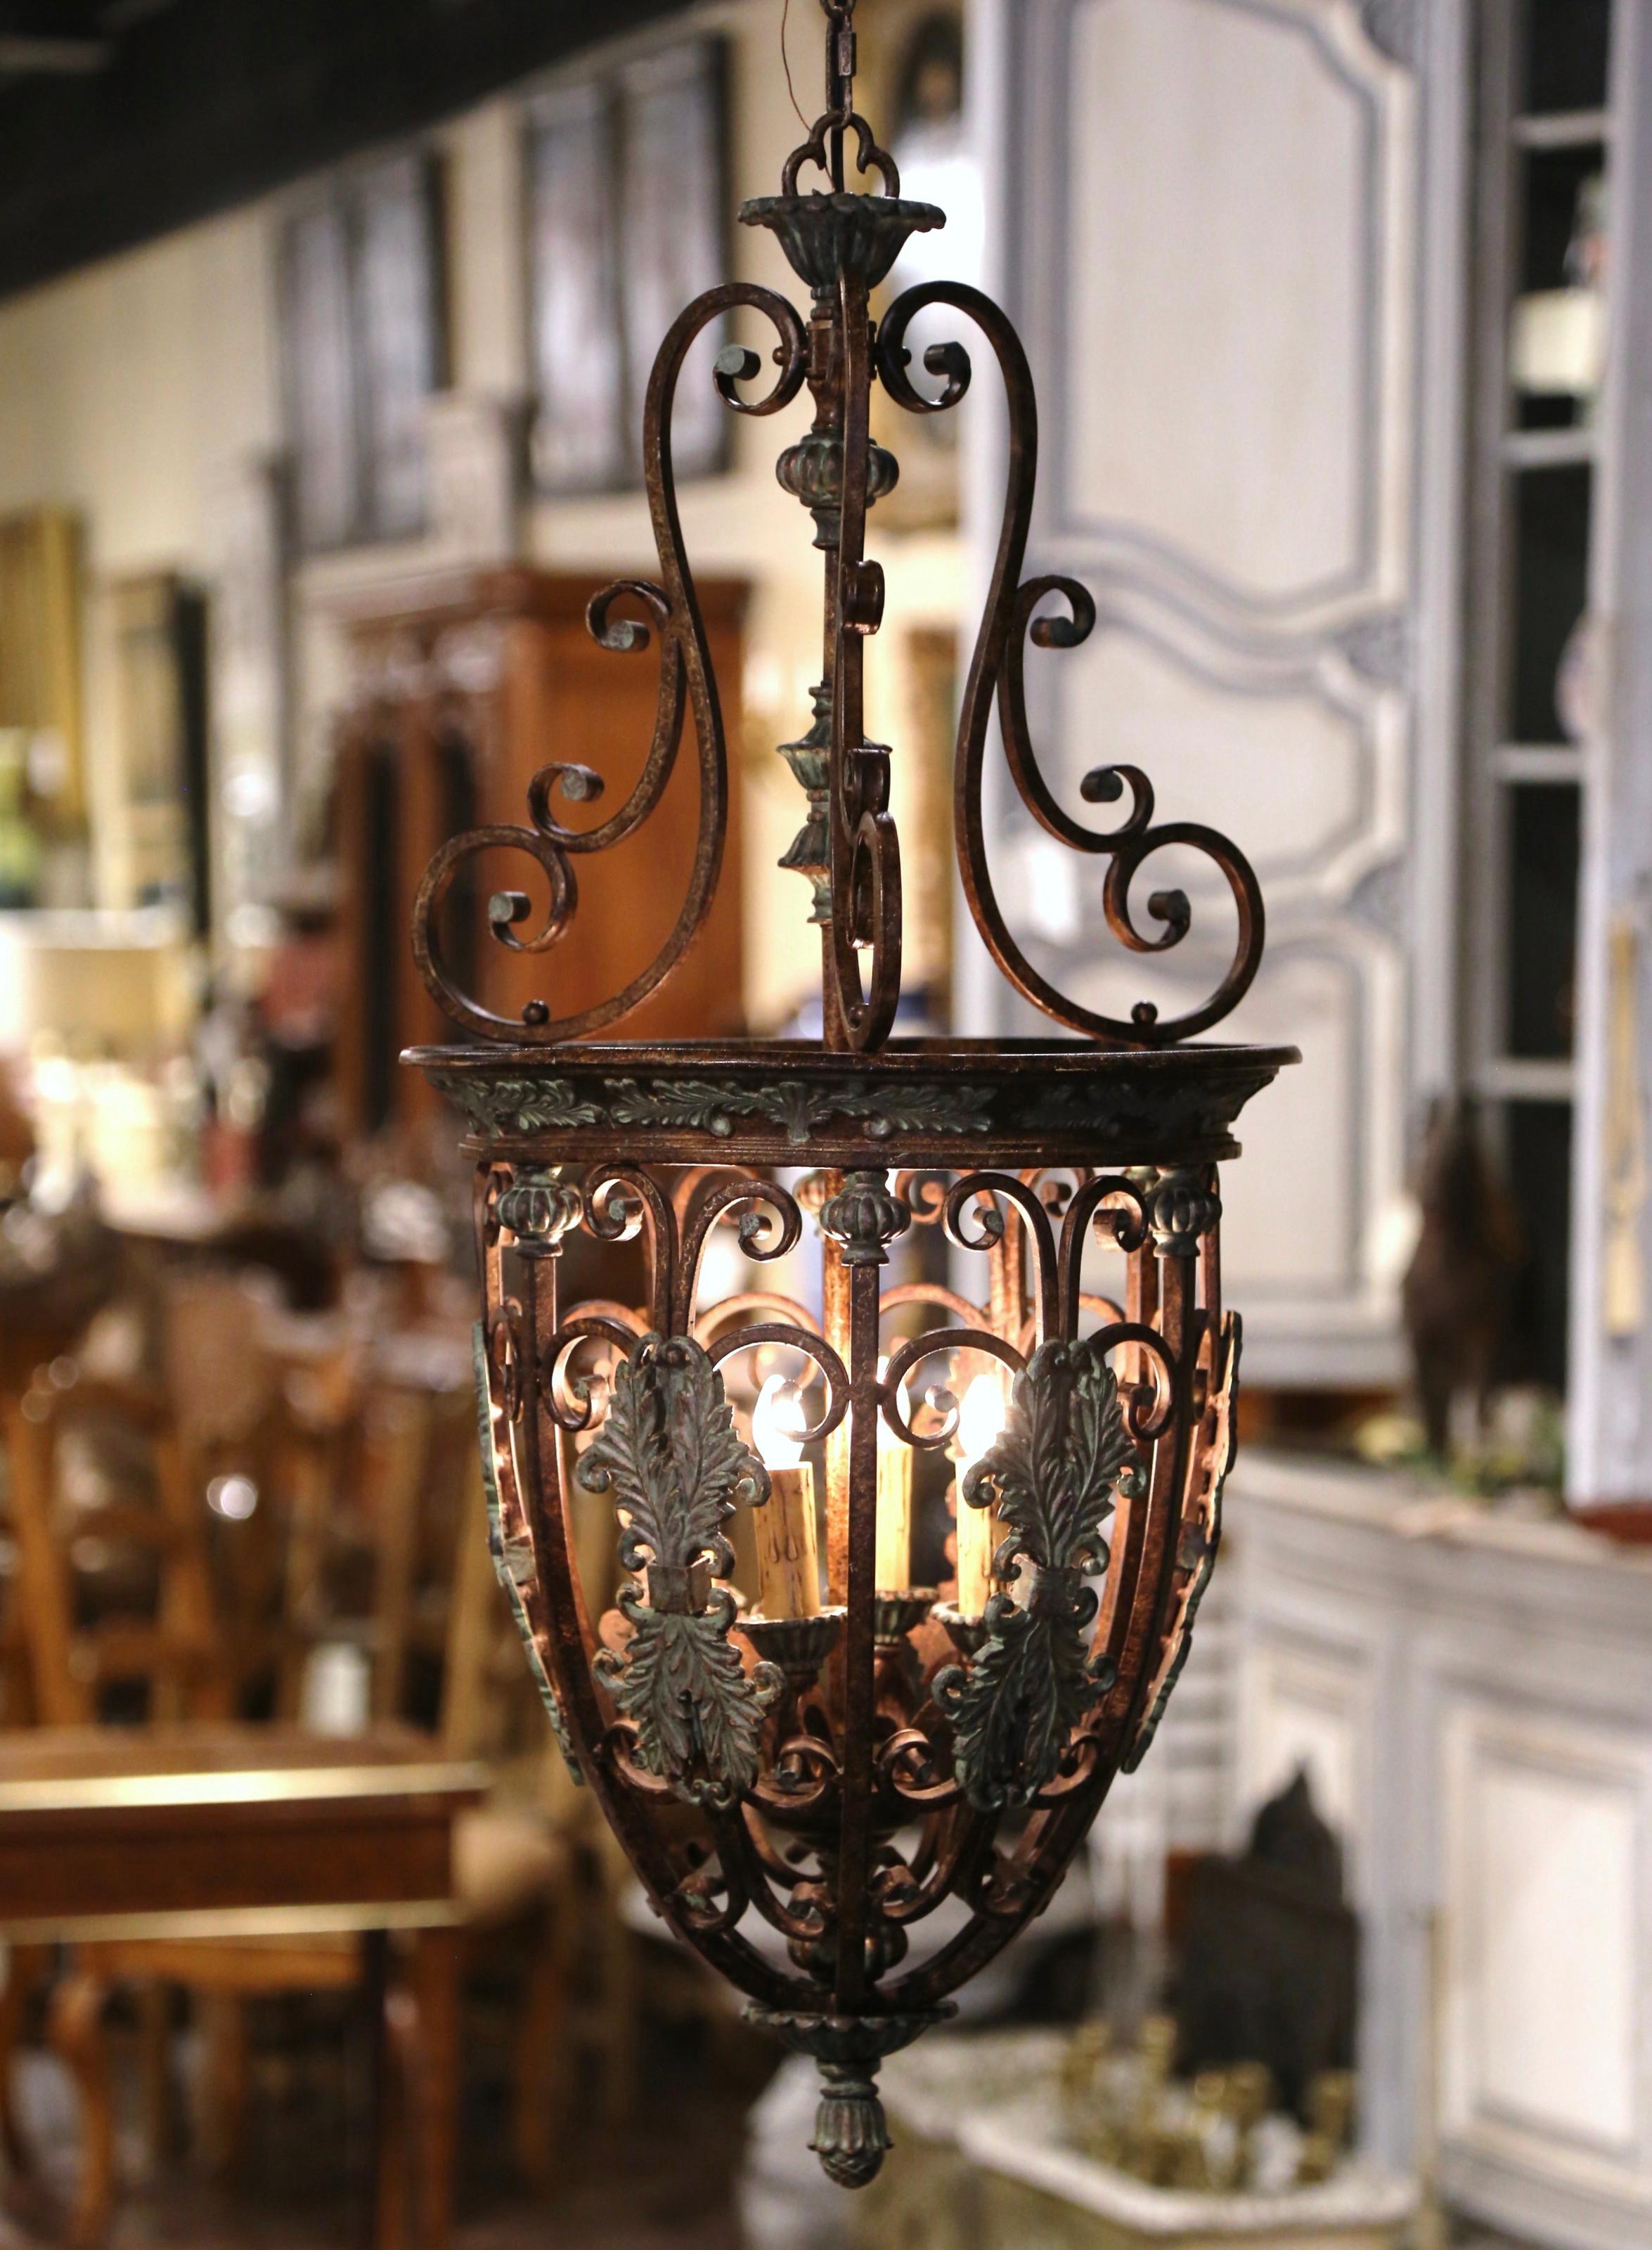 Crafted in France circa 1970, and round in shape with olive form, the two-tone lantern features a scrolled top, and is decorated with a pierced ornate body embellished with acanthus leaf and floral motifs, and dressed with a cone finial at the